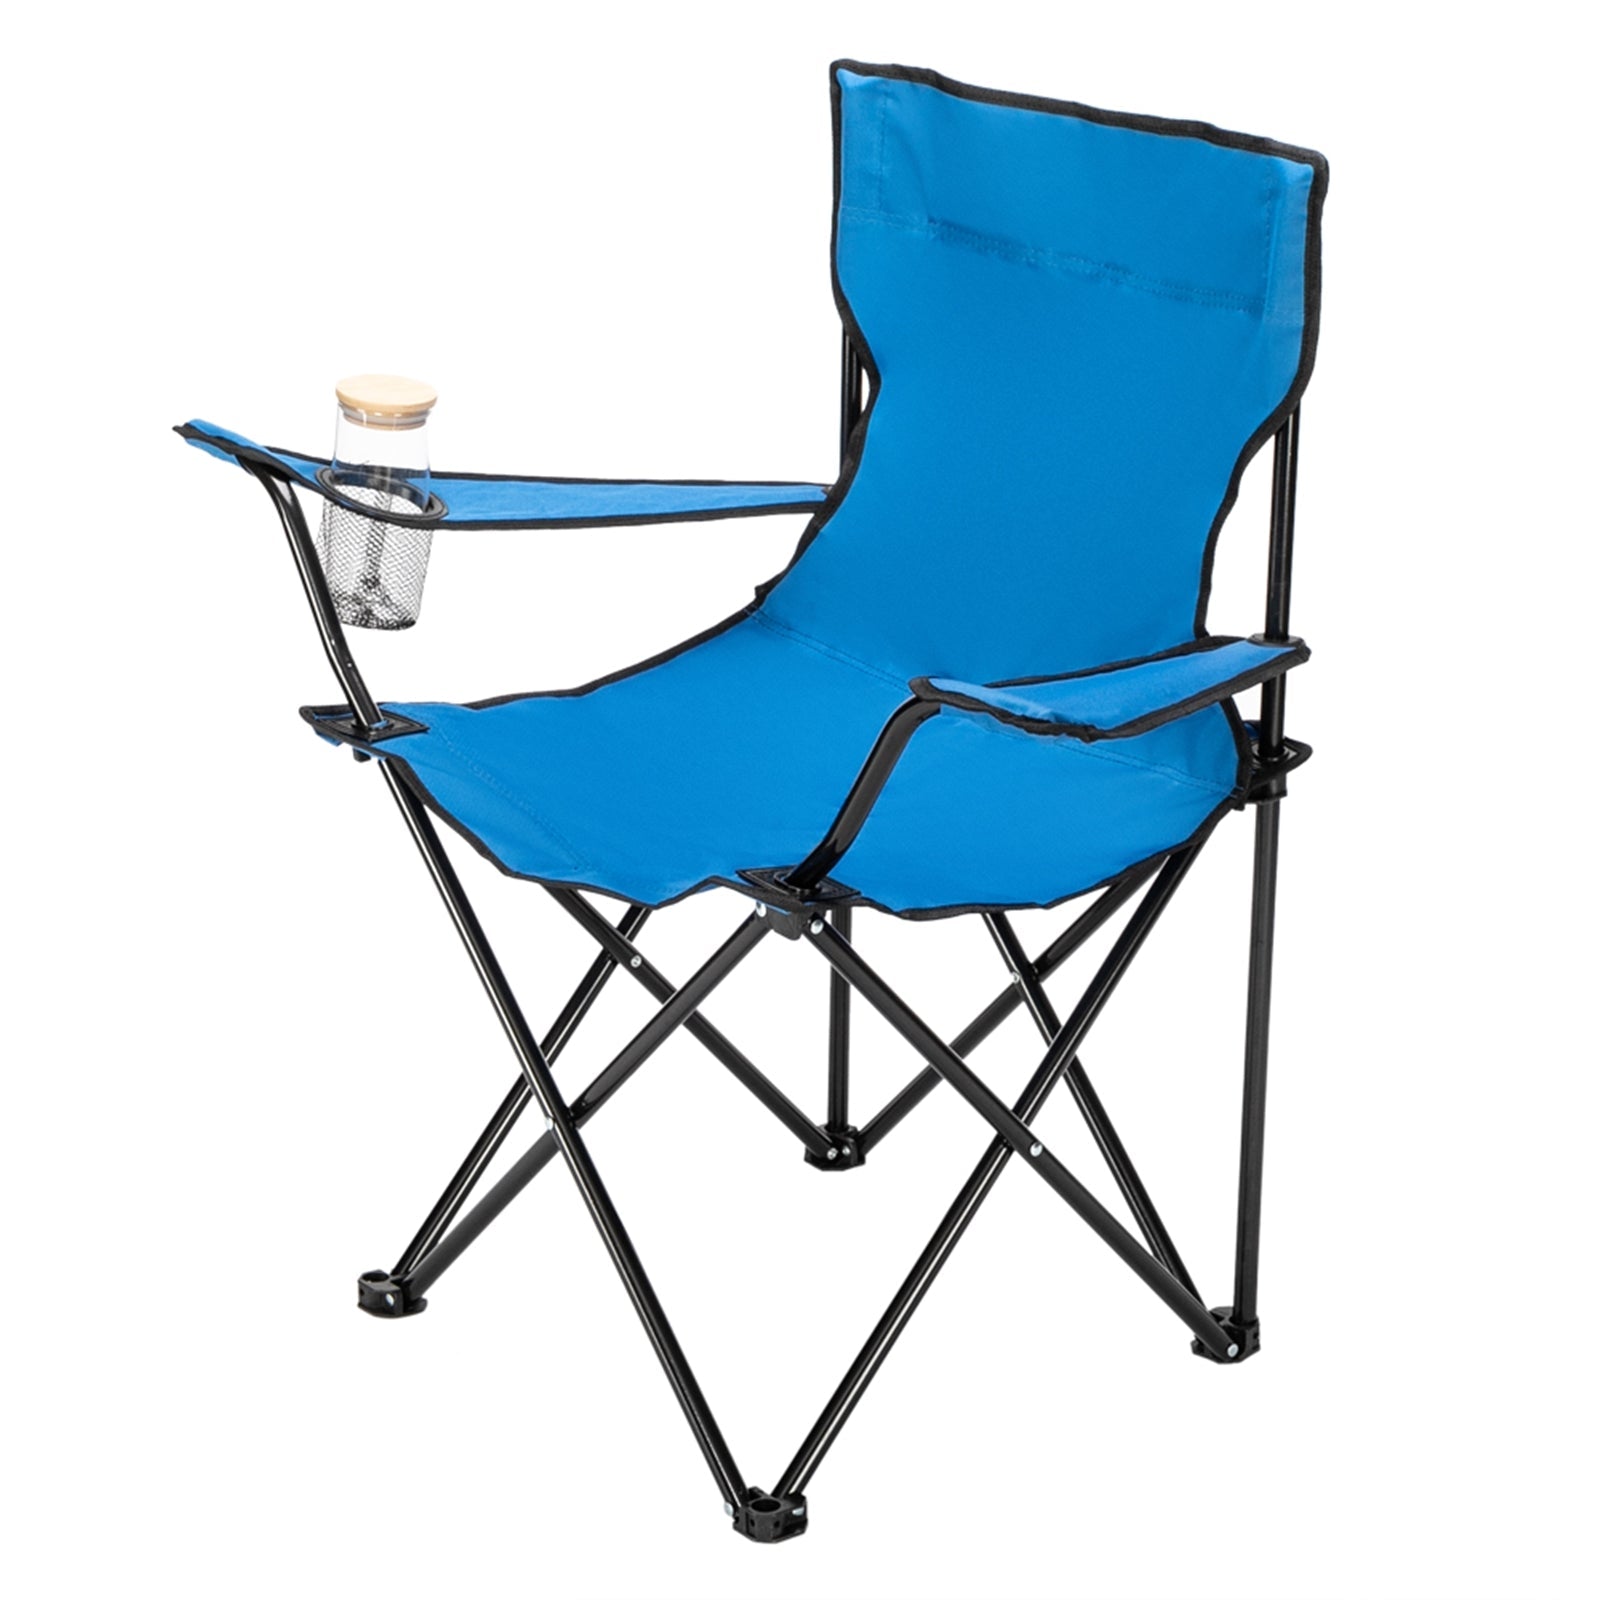 JUMPER Folding Camp Chair, Portable Beach Chairs Lawn Chairs Lounge Chairs with Armrest and Cup Holder for Fishing, Camping, and Outdoors, Blue